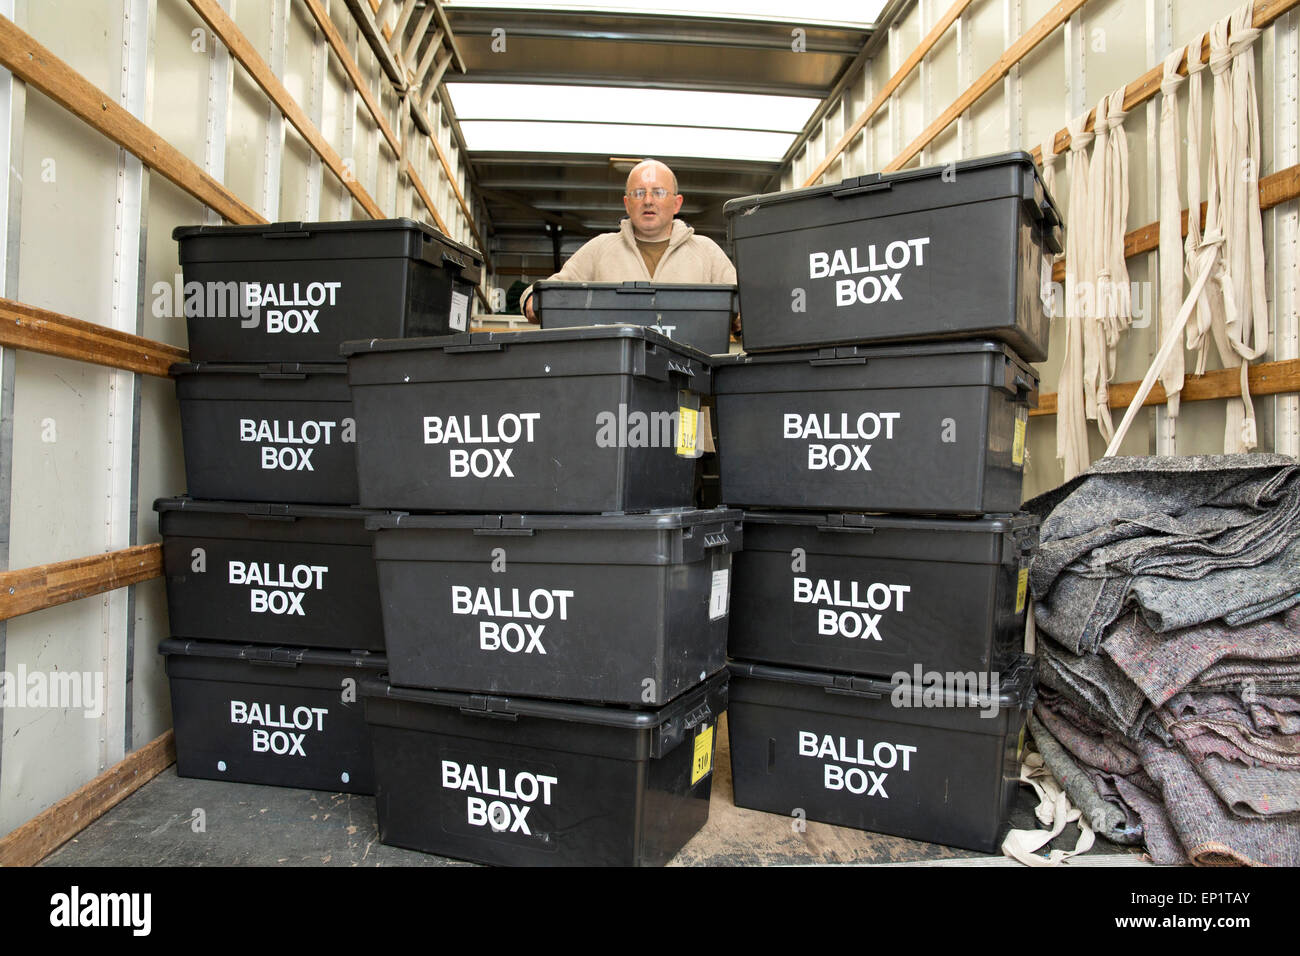 Ballot boxes being delivered to Sheldon Heath community centre ready for voting in the General Election Stock Photo